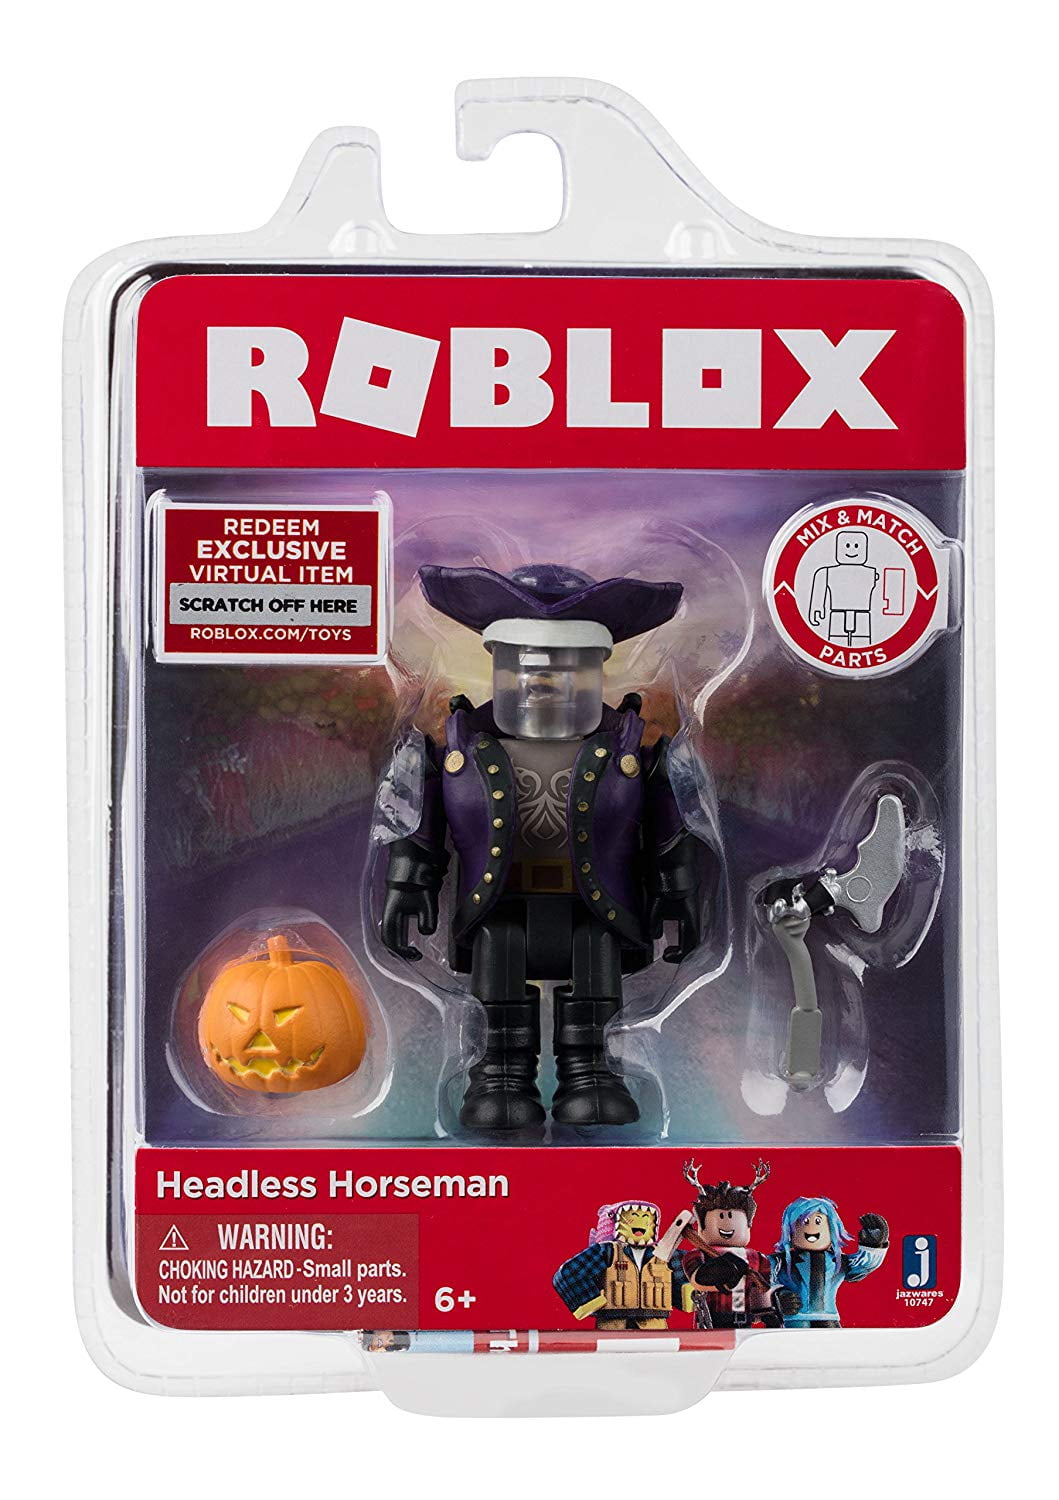 Headless Horseman Figure With Exclusive Virtual Item Game Code Roblox Headless Horseman Figure Packwalmartes With One Figure Accessories And Collector S Checklist By Roblox Walmart Com Walmart Com - the holy ghost electric show roblox toys series 3 checklist